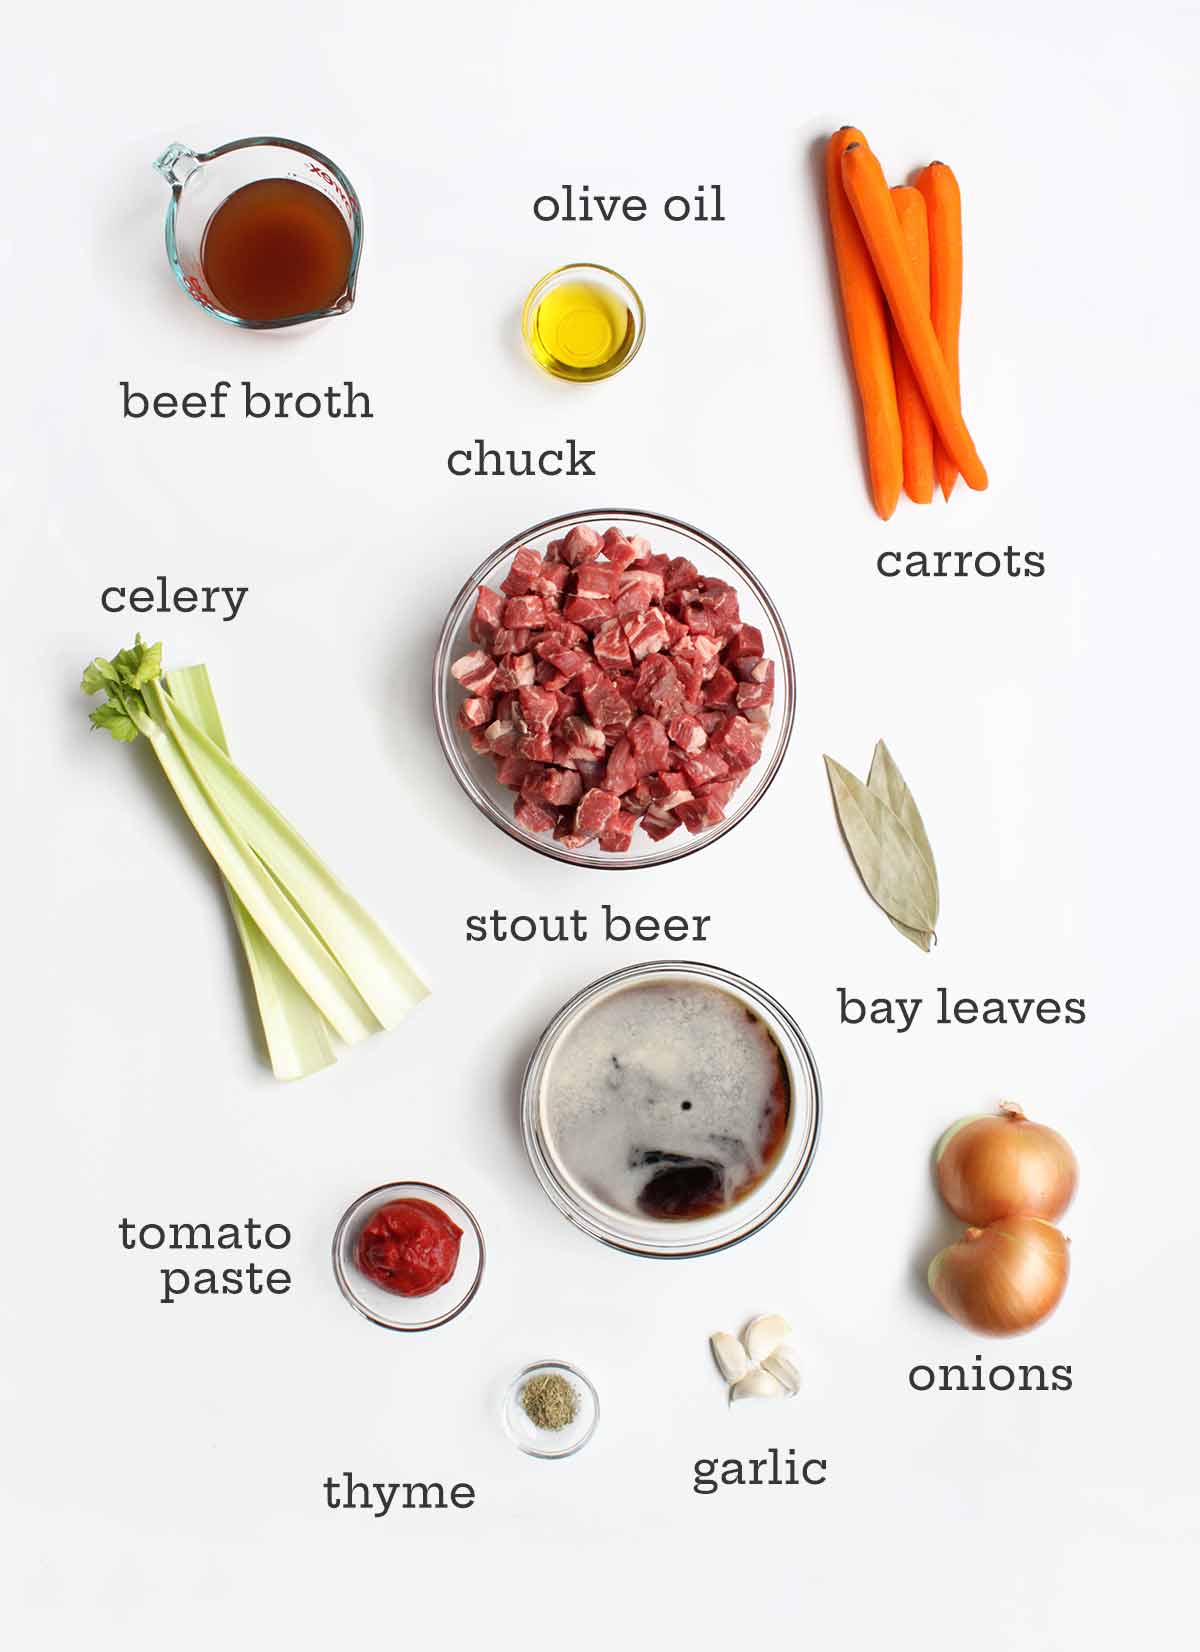 The ingredients for Irish beef stew on a white background.